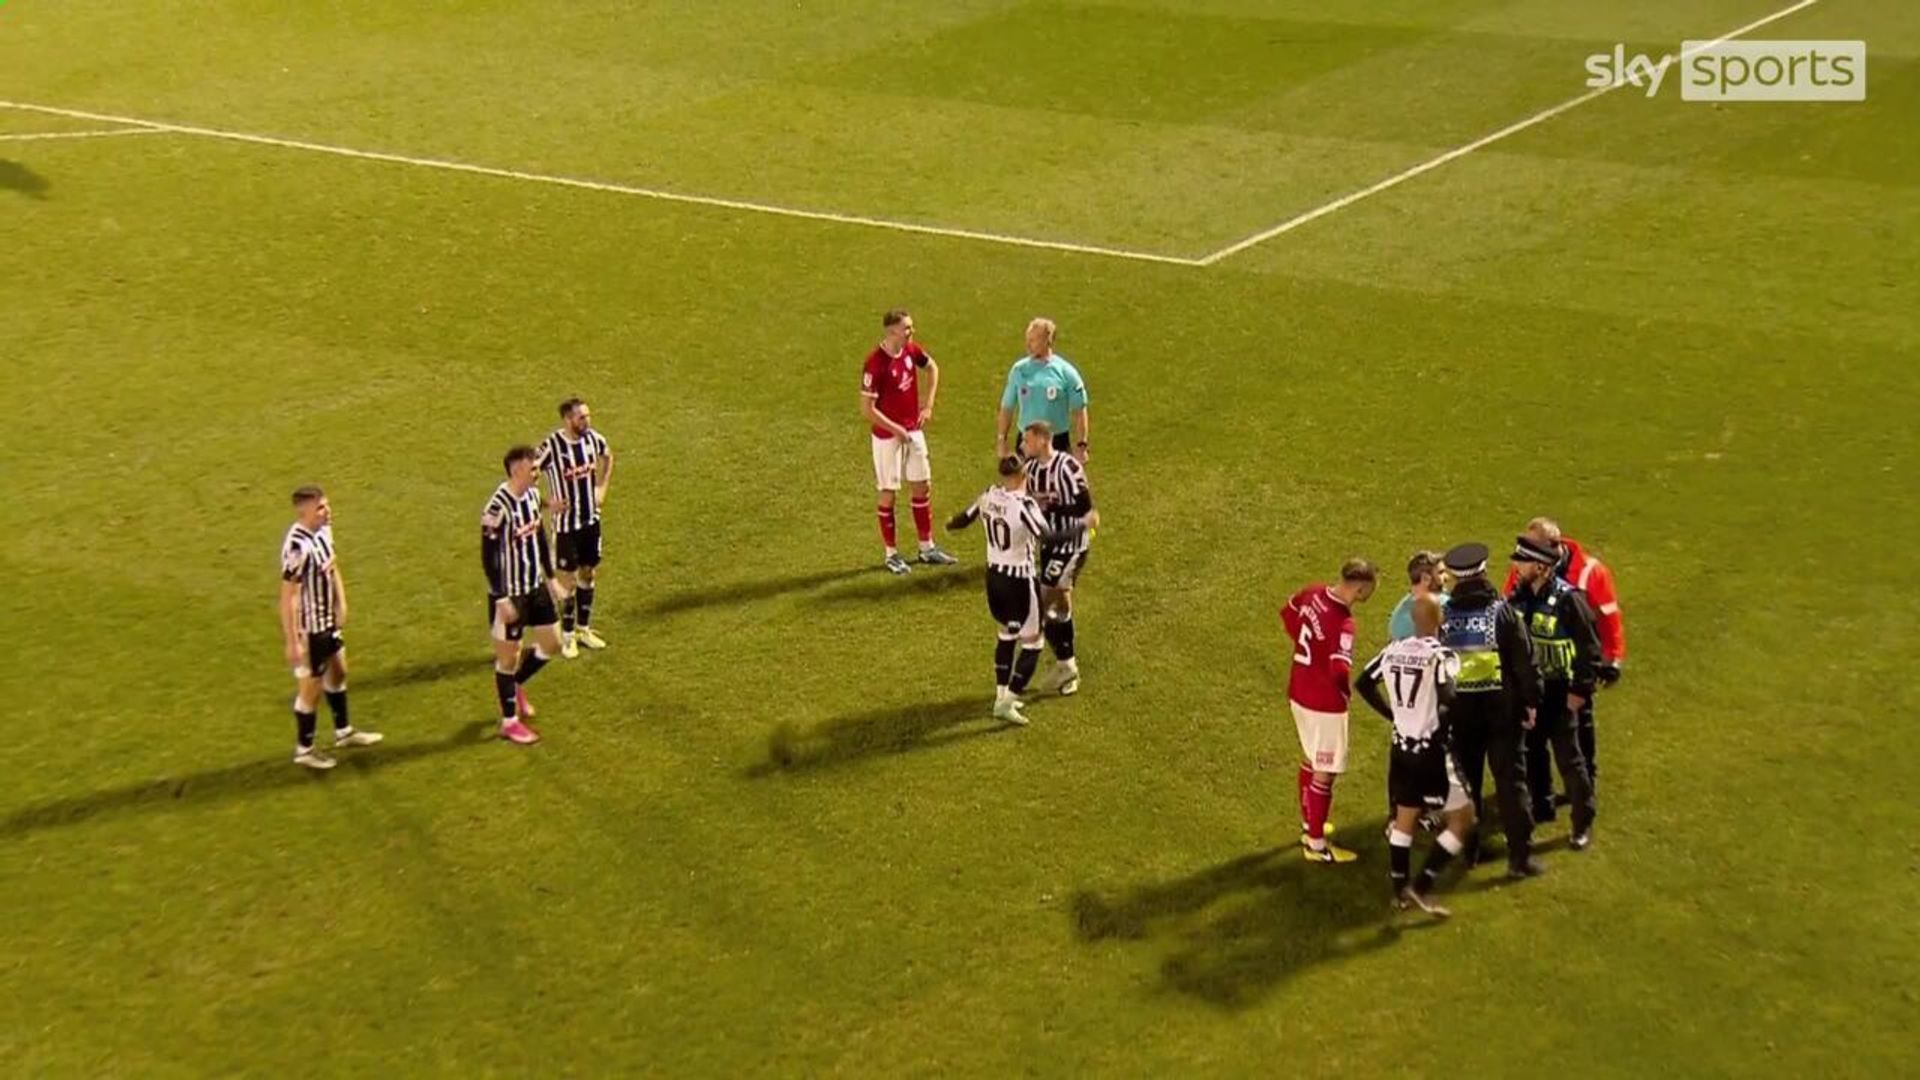 Linesman forced to switch touchlines after crowd trouble at Crewe v Notts County